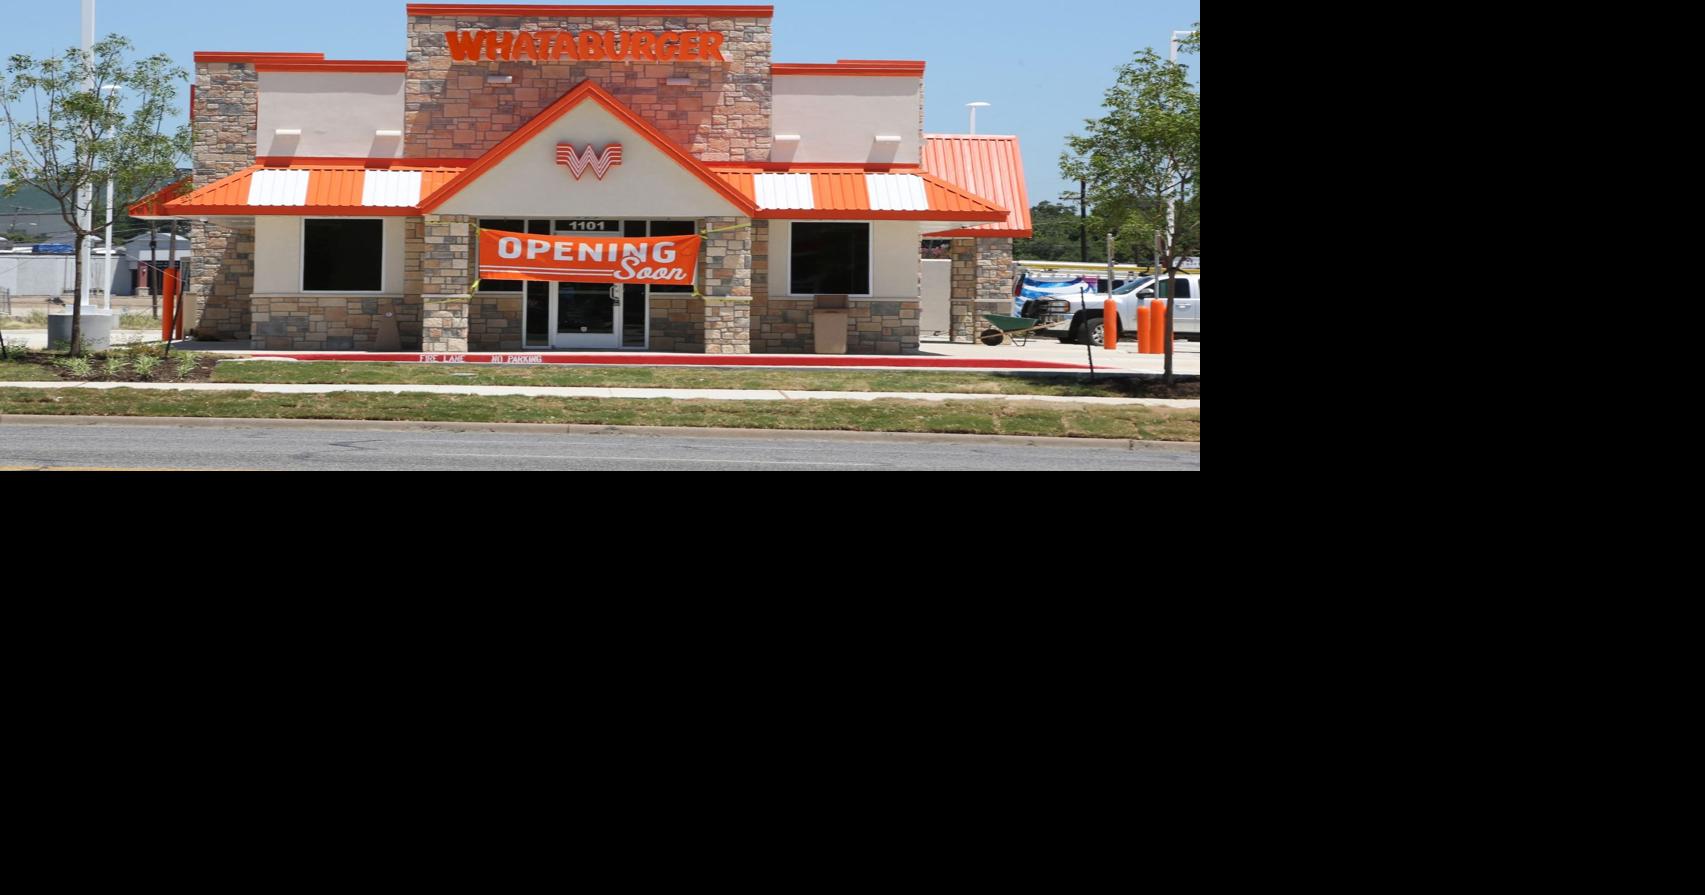 Whataburger holds grand opening Tuesday, May 16